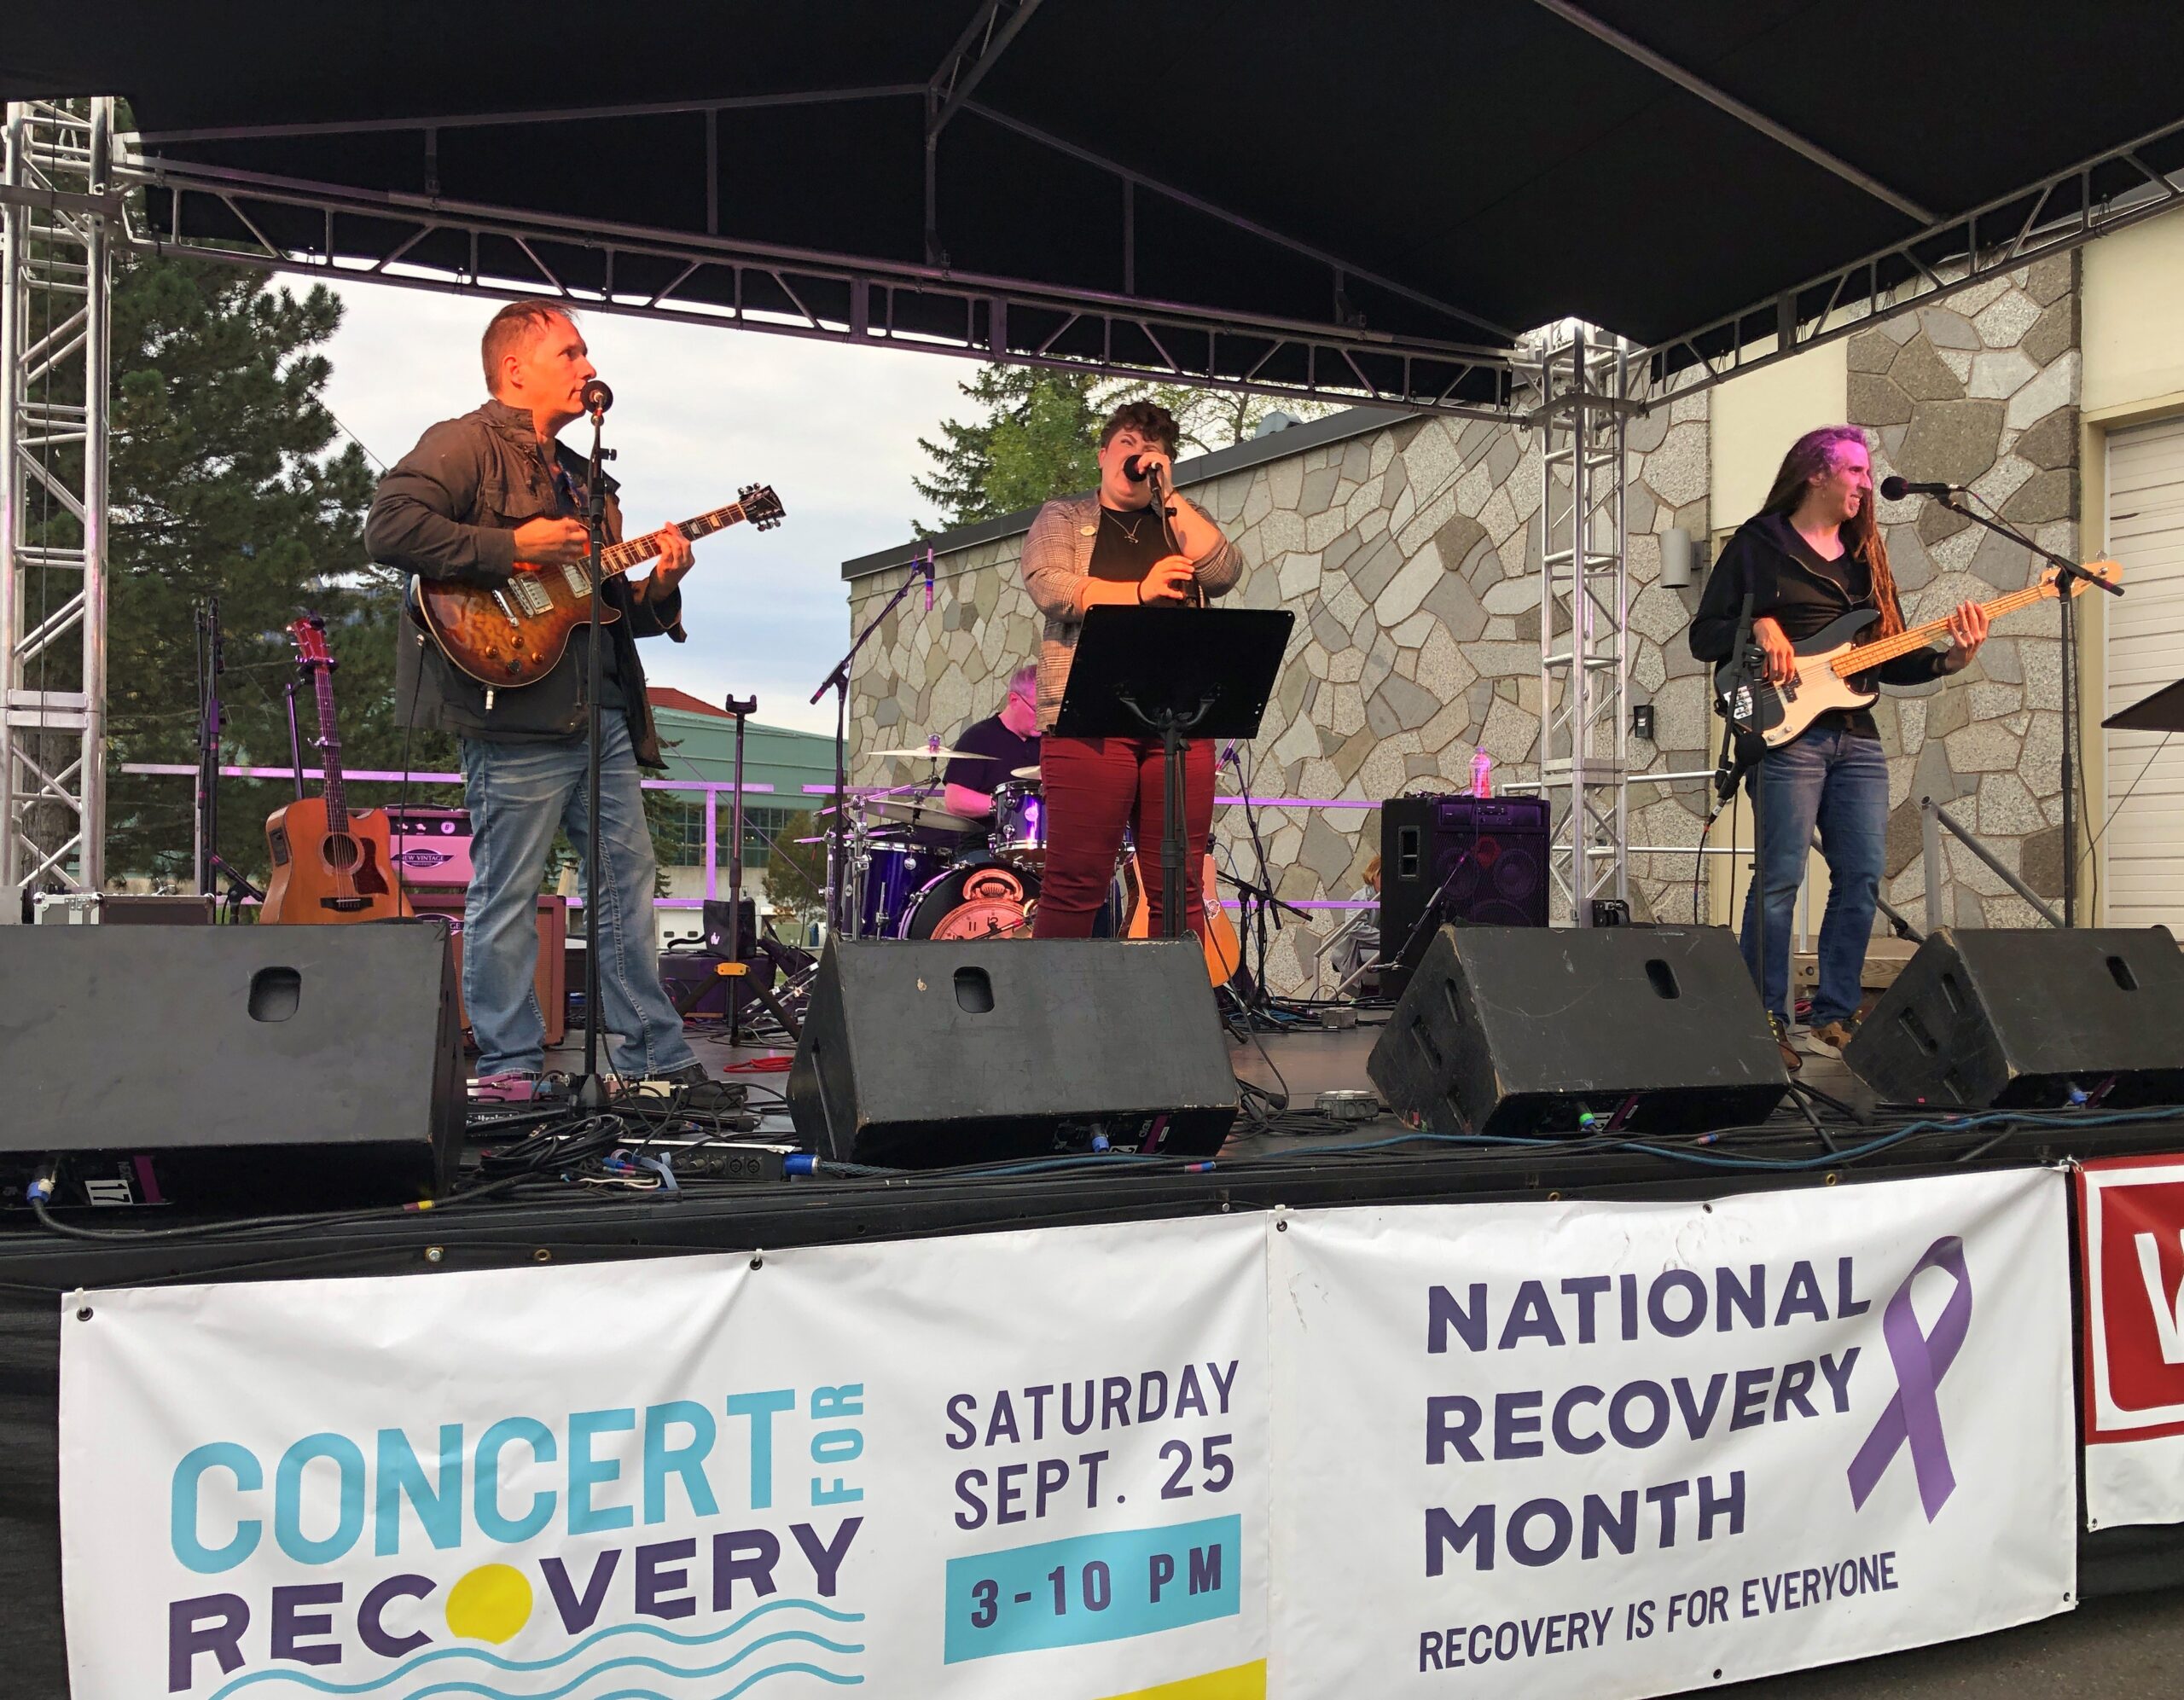 The band South of Superior performs at Concert for Recovery; R. Washington, 2021.